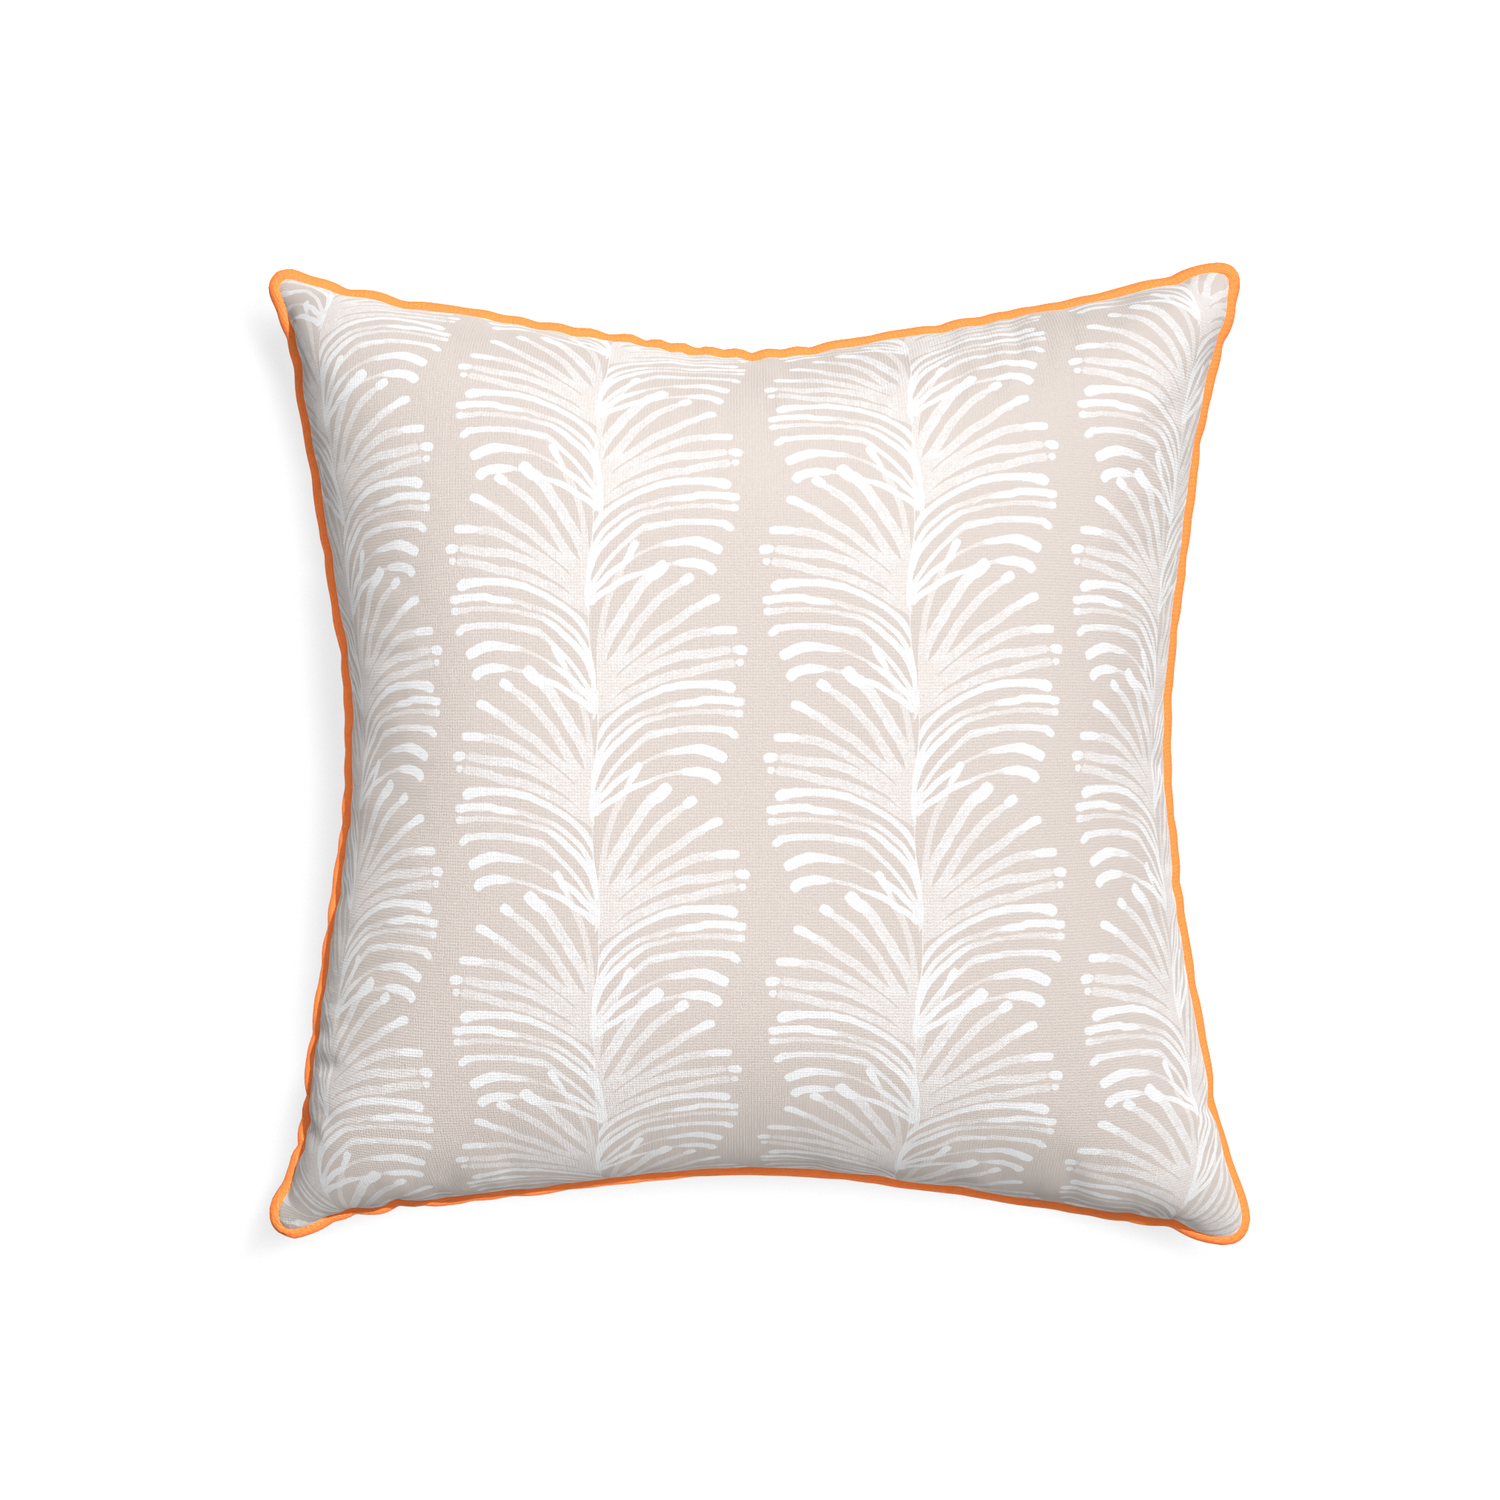 22-square emma sand custom pillow with clementine piping on white background